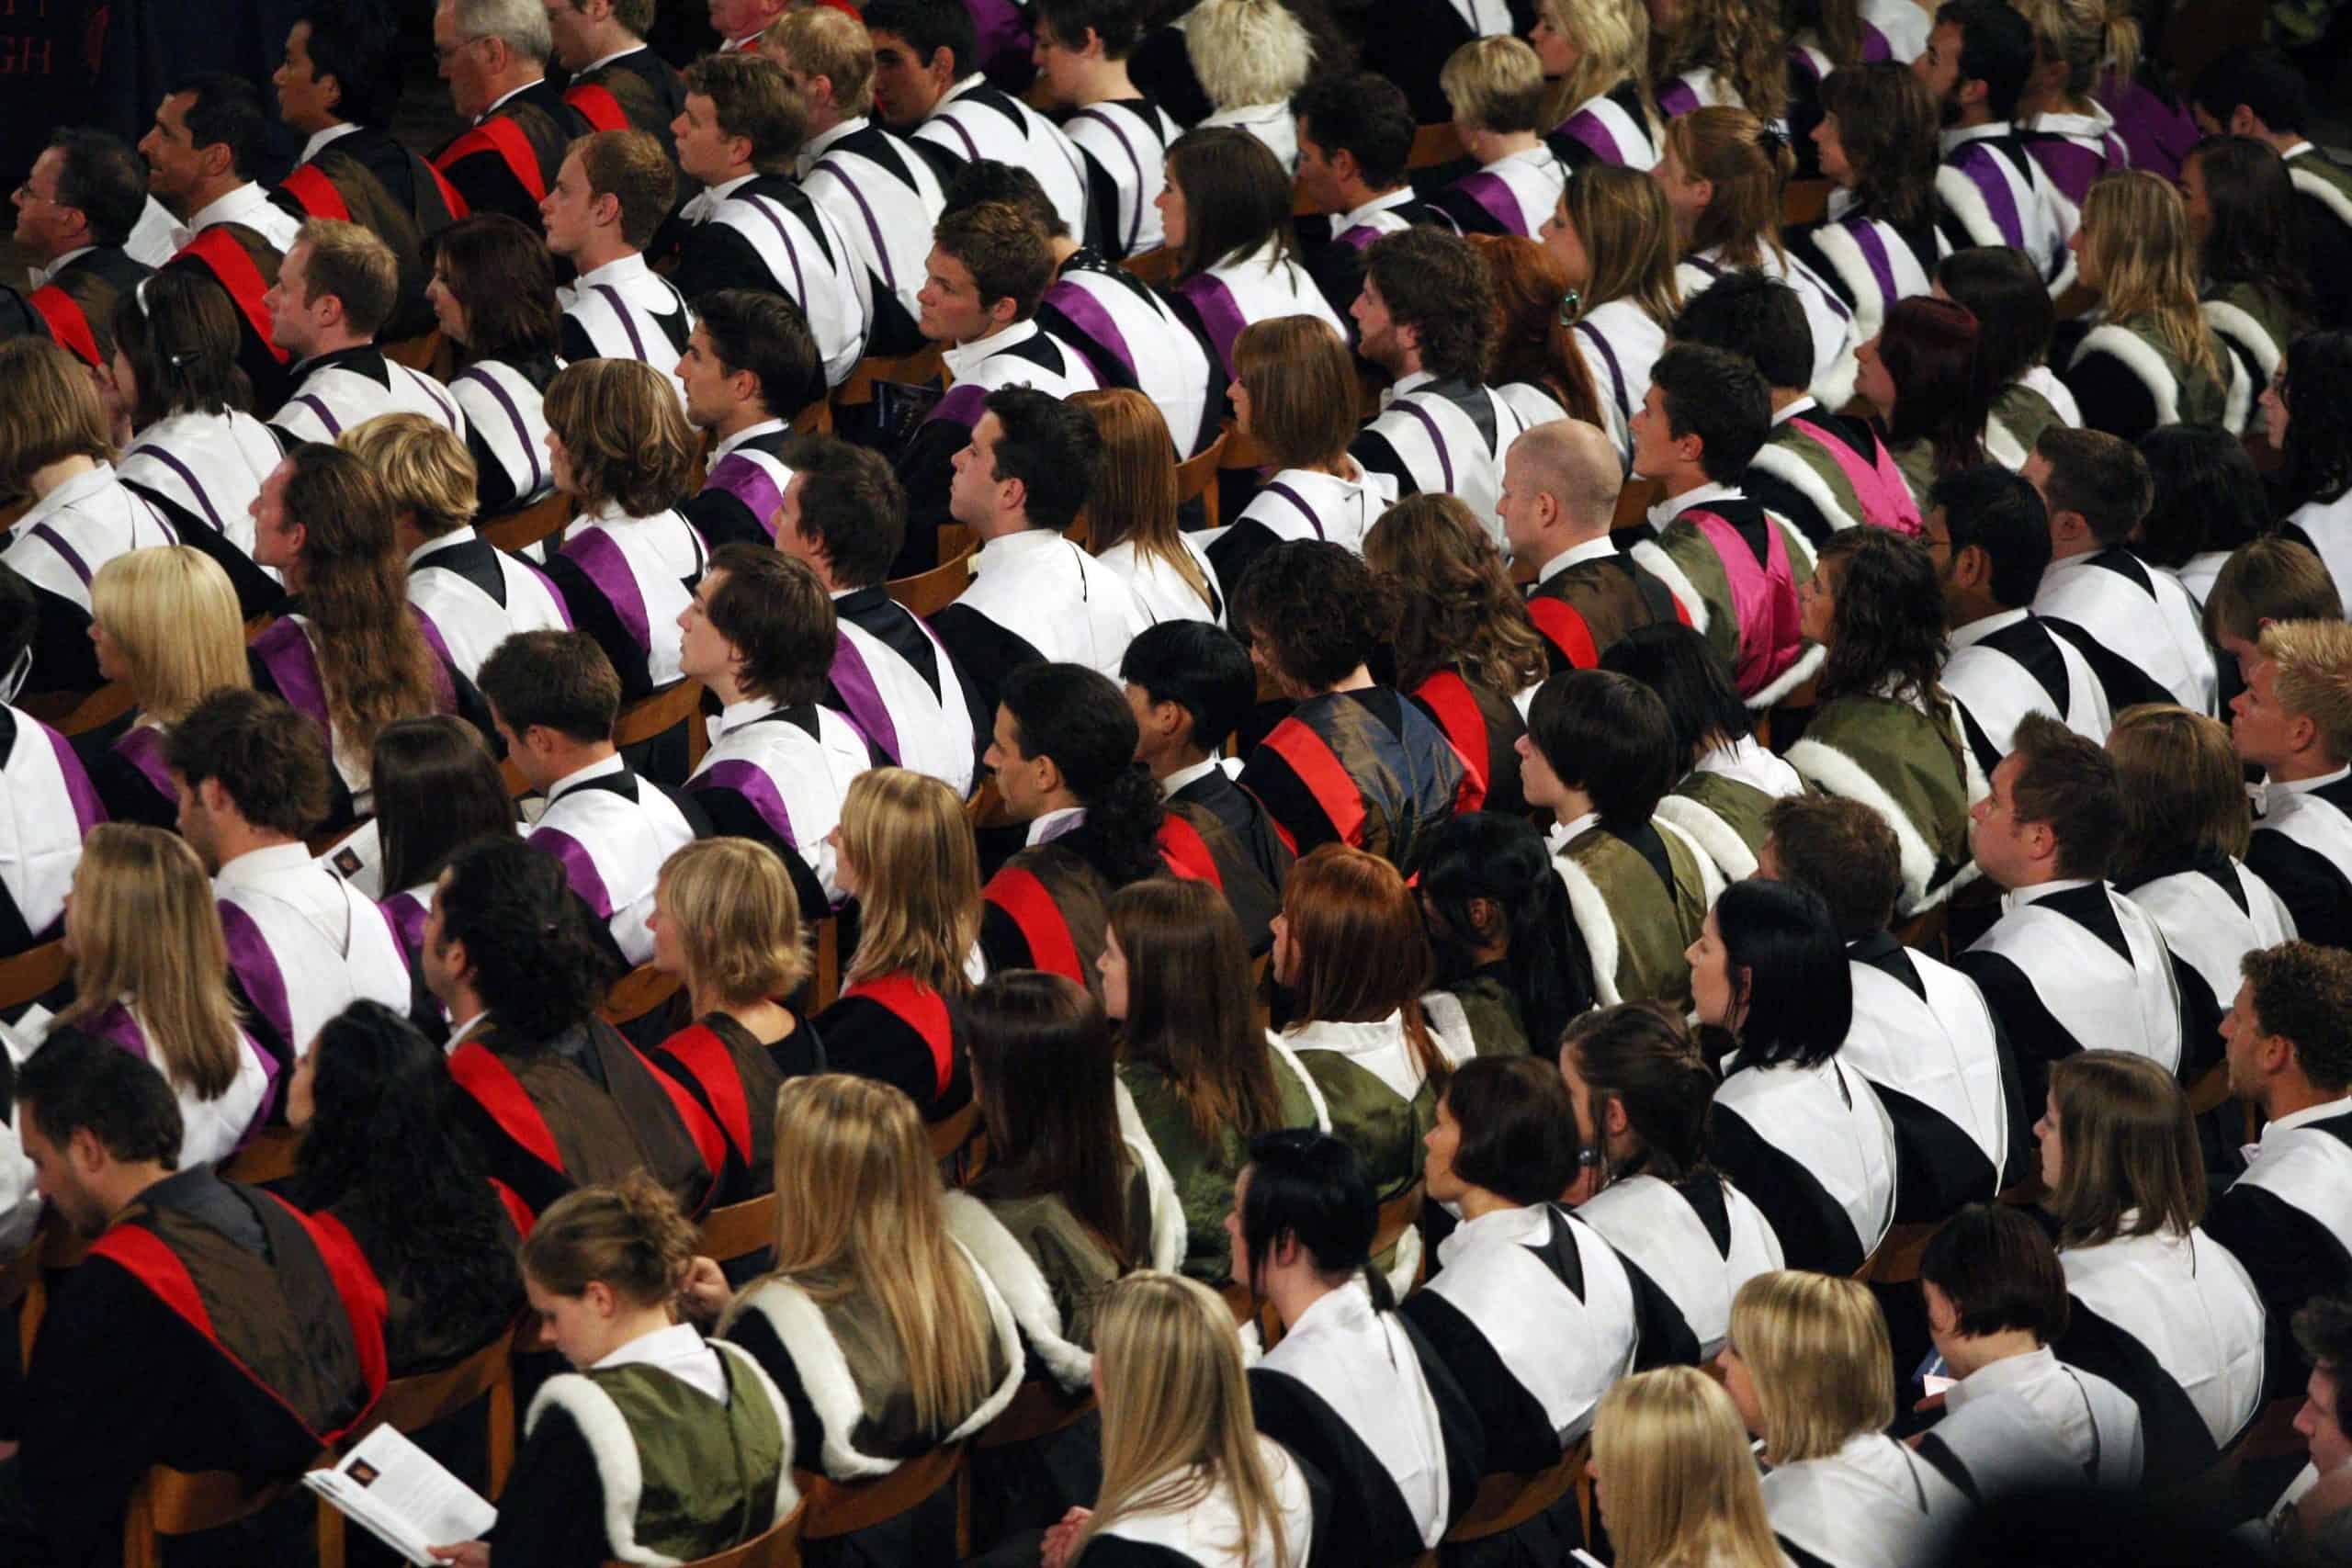 Largest single student debt in England is staggering £189,700